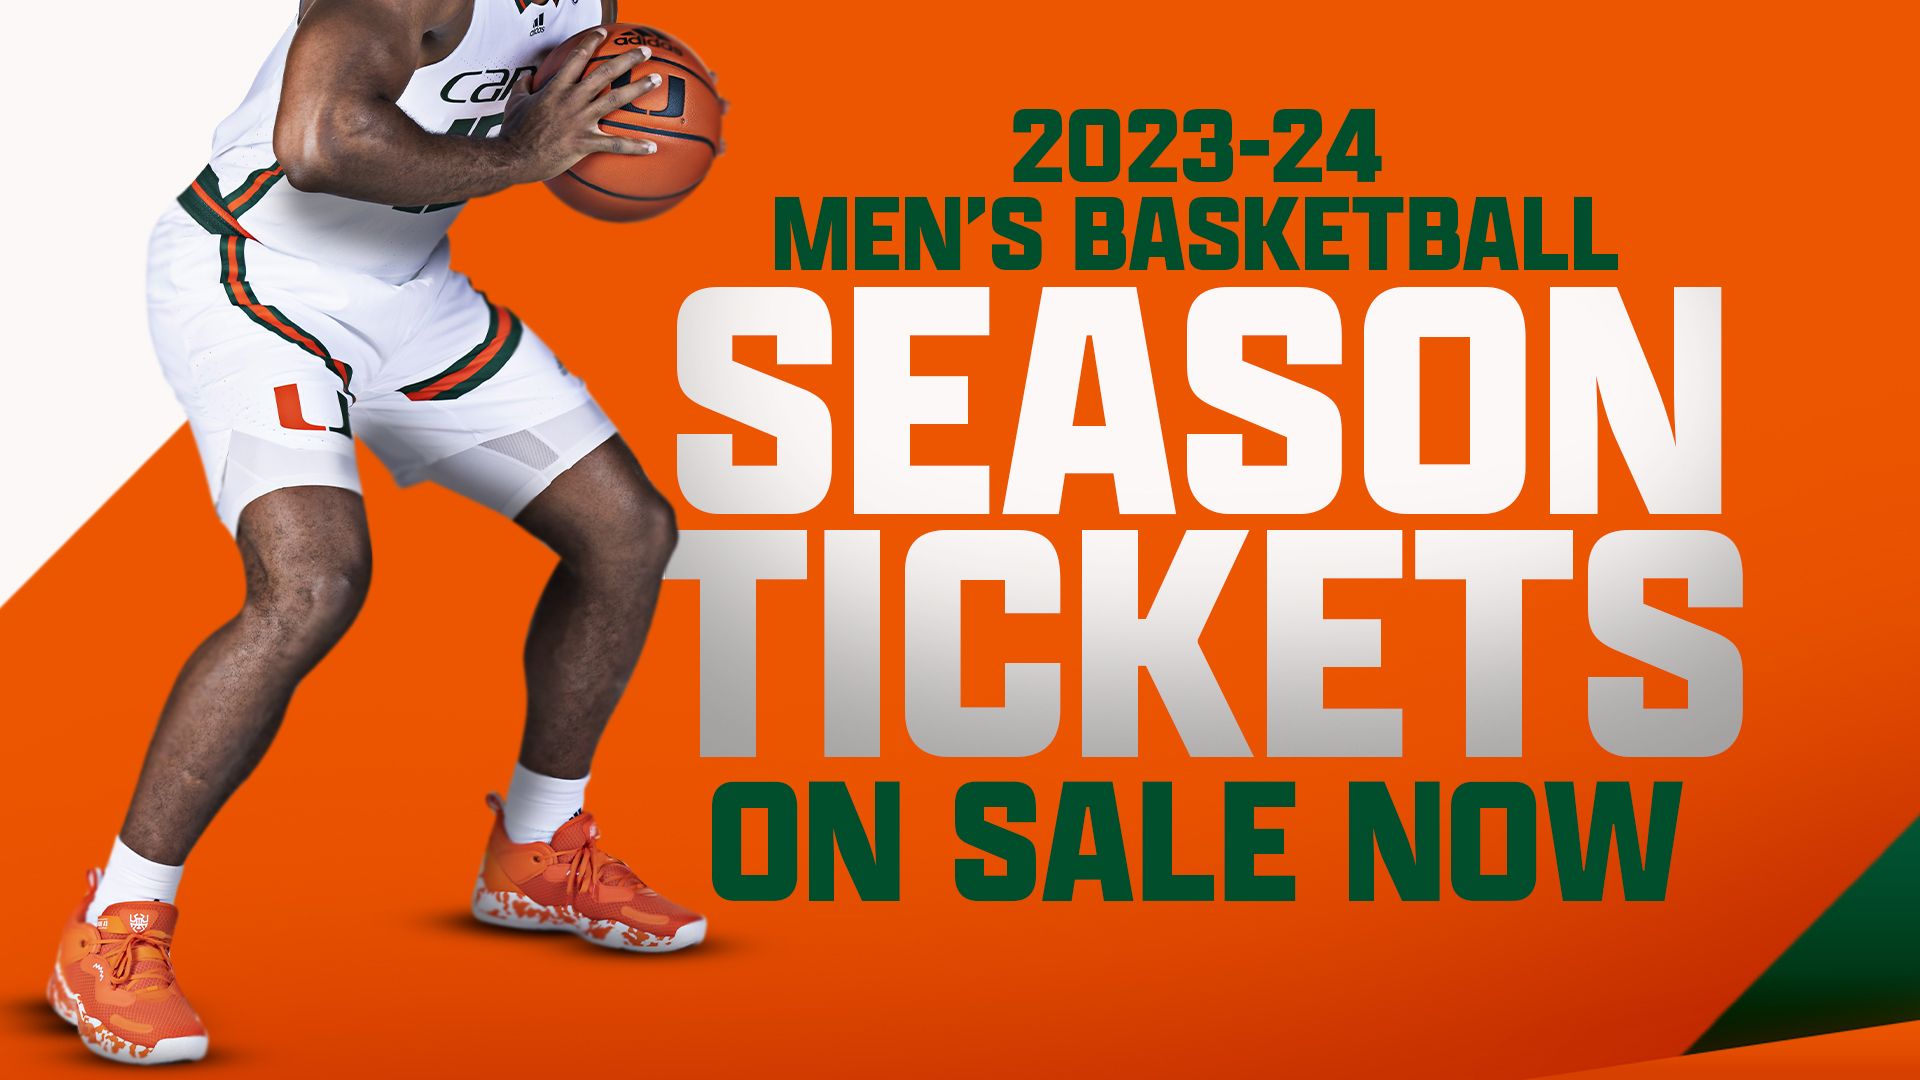 Season Tickets Available Now!